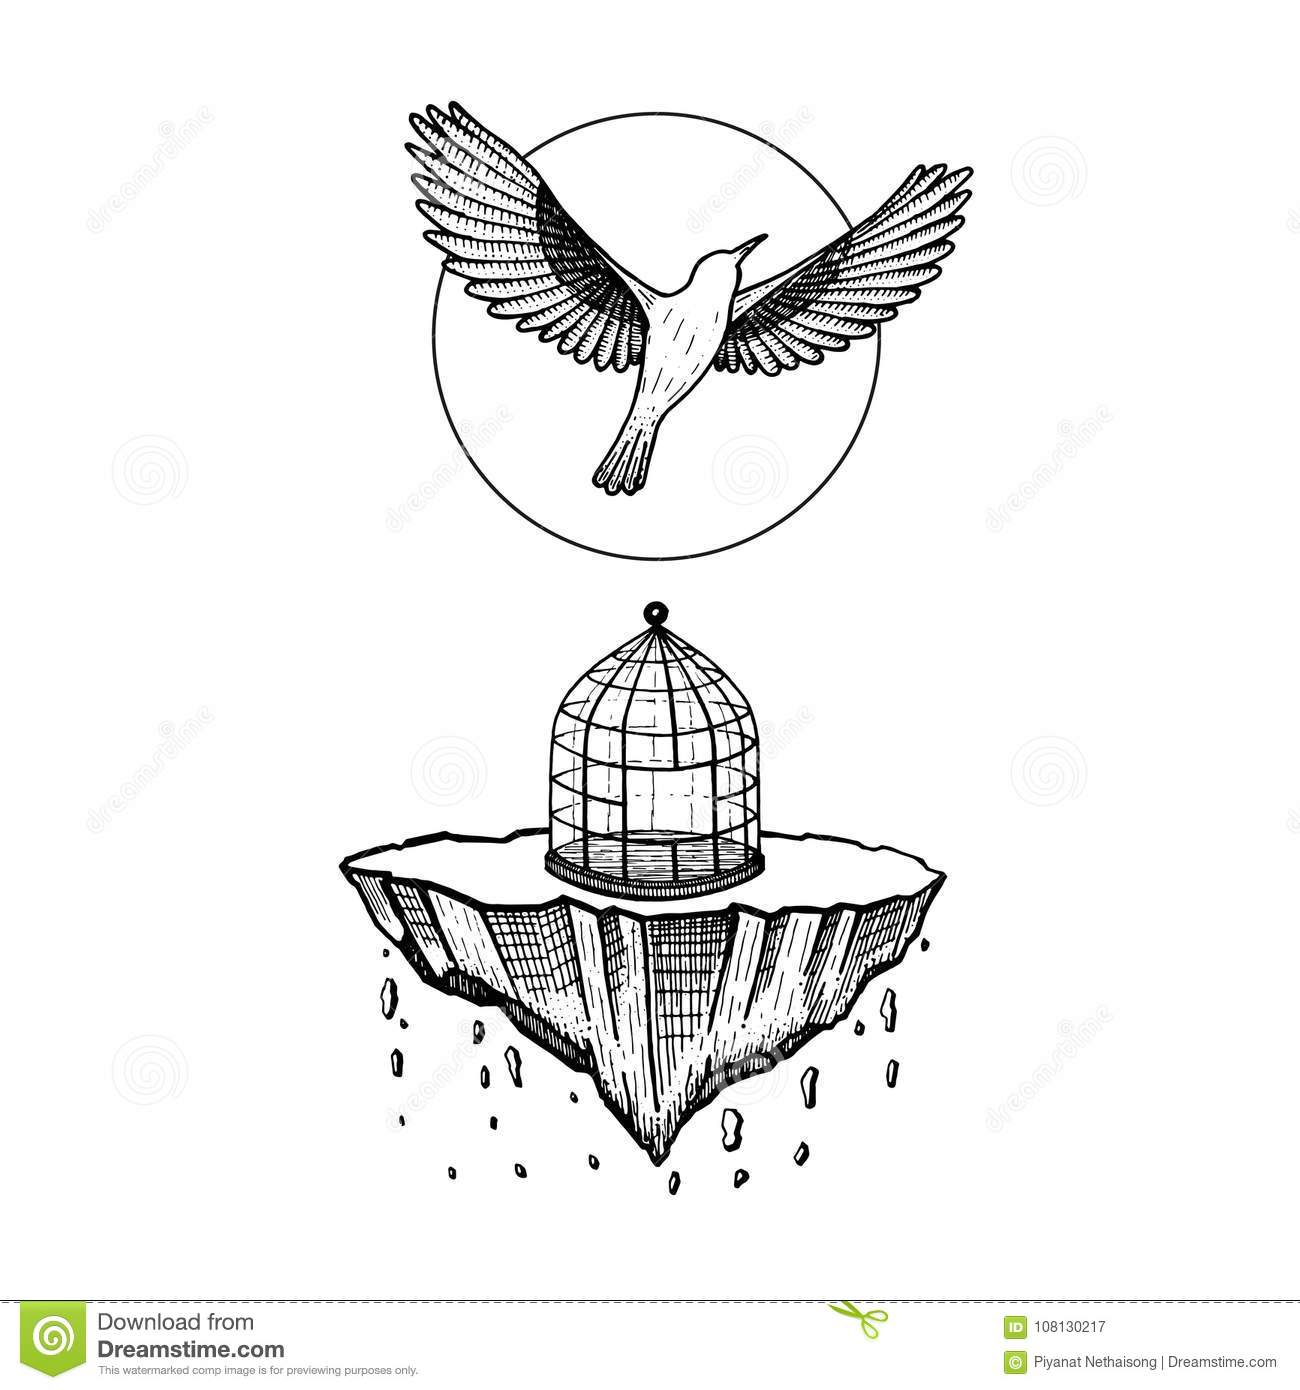 Bird Flying From Cage The World Collapses Stone Falling Bird in proportions 1300 X 1390